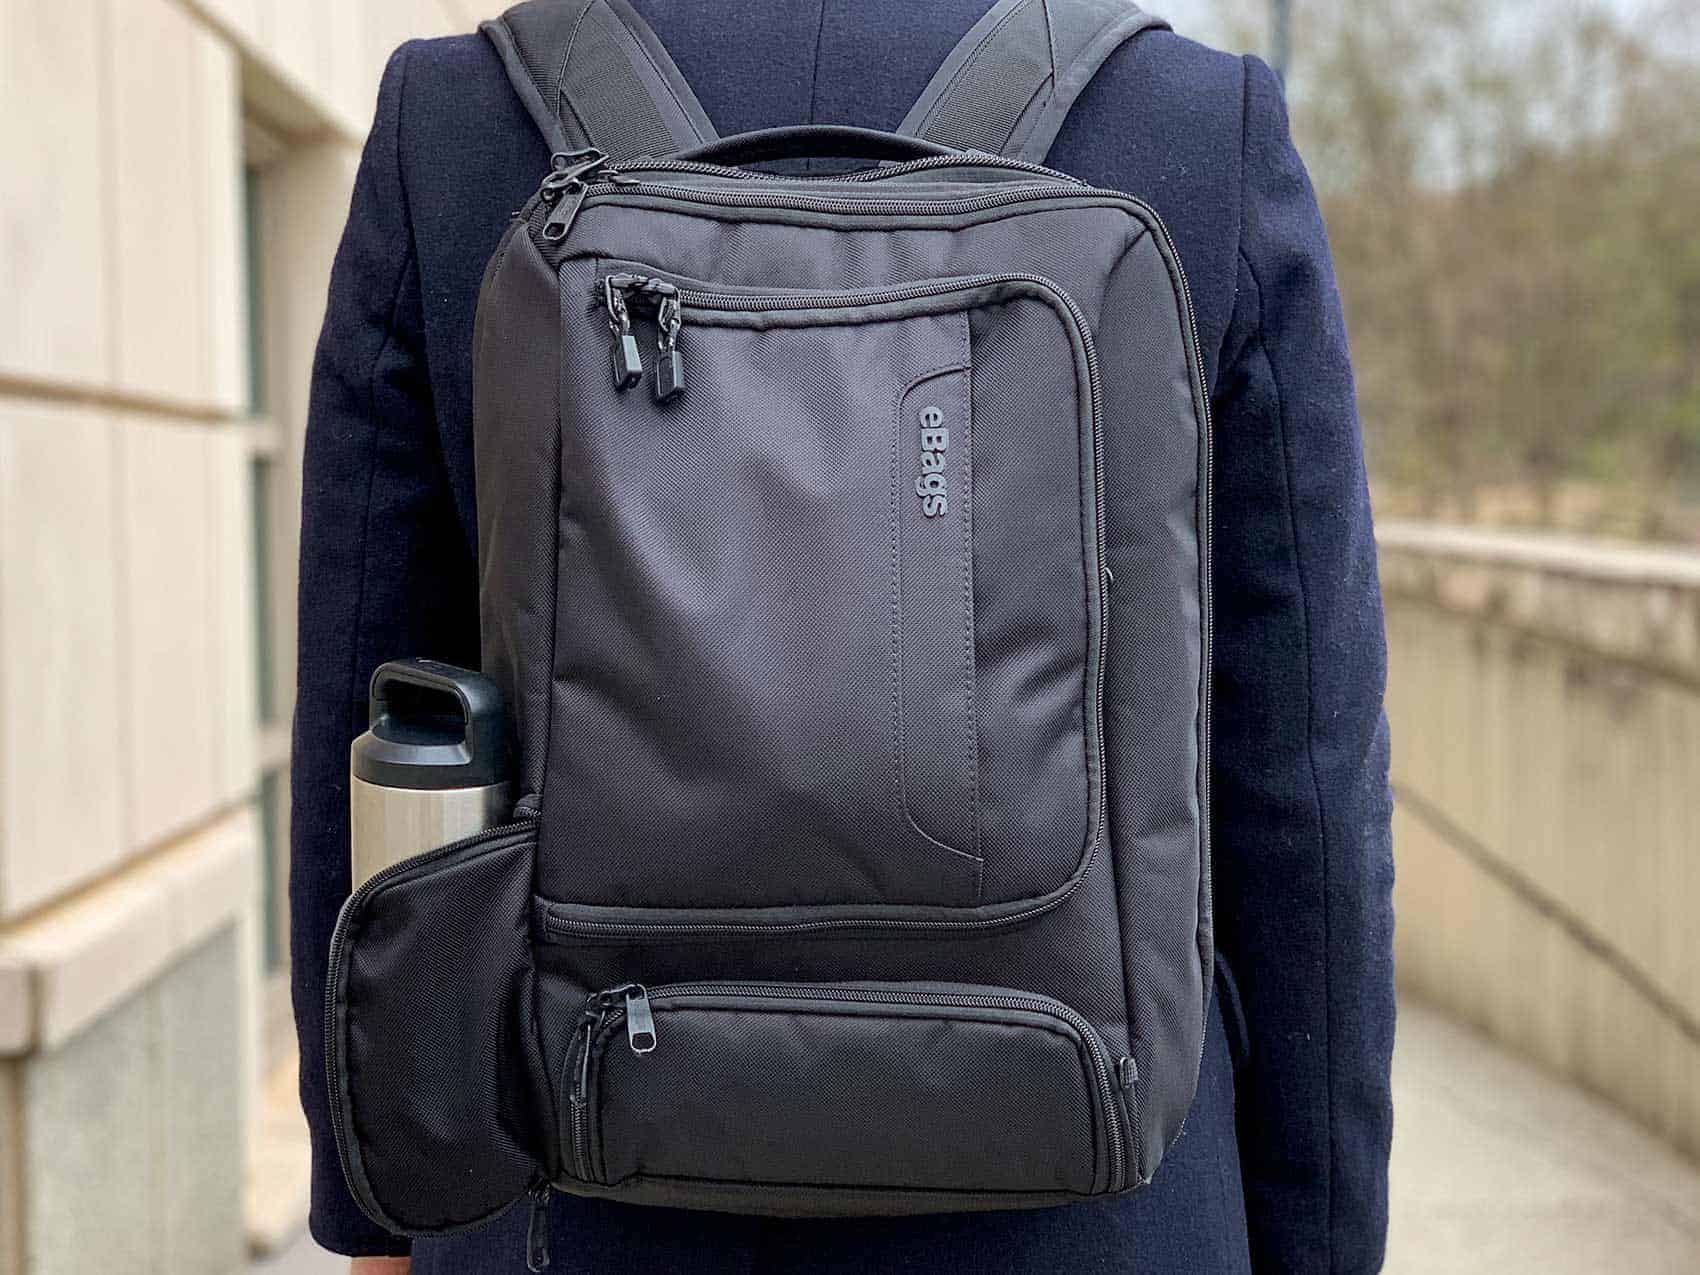 ebags-professional-slim-laptop-backpack-review-endless-pockets-in-a-slim-bag